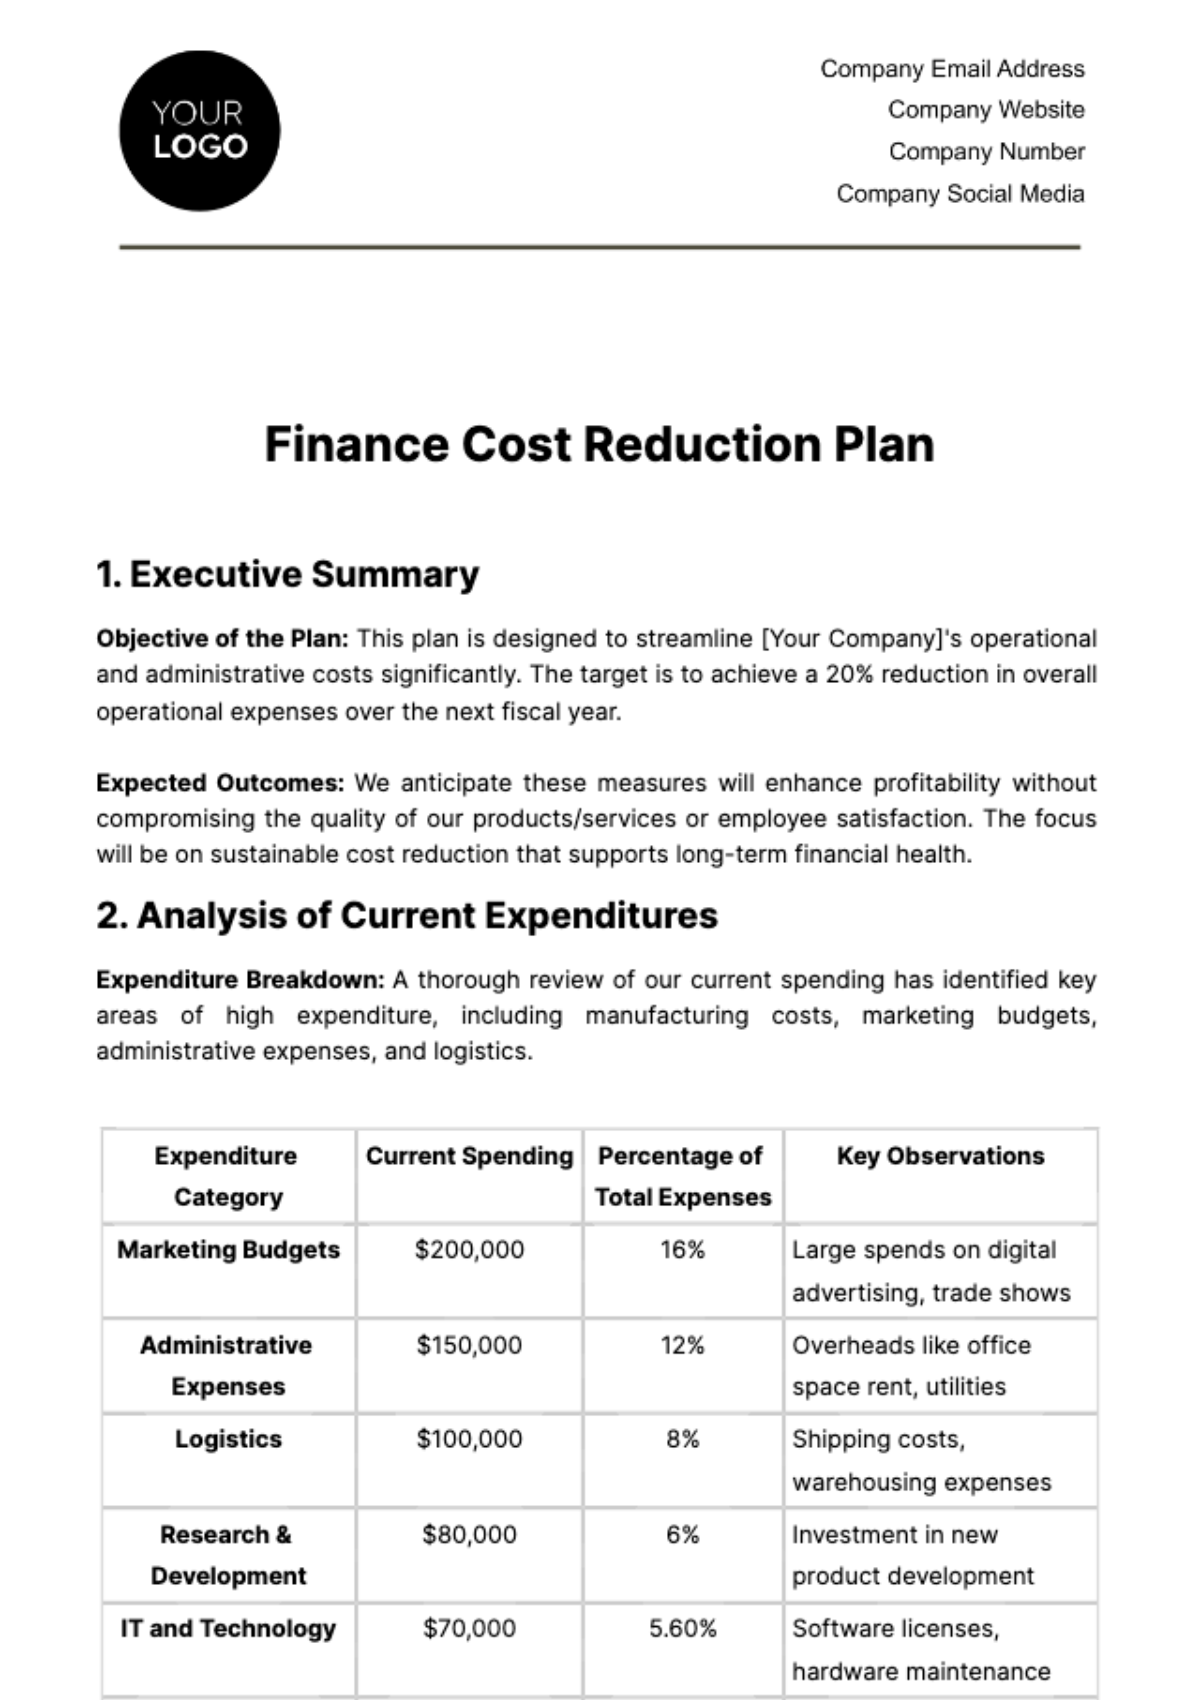 Free Finance Cost Reduction Plan Template